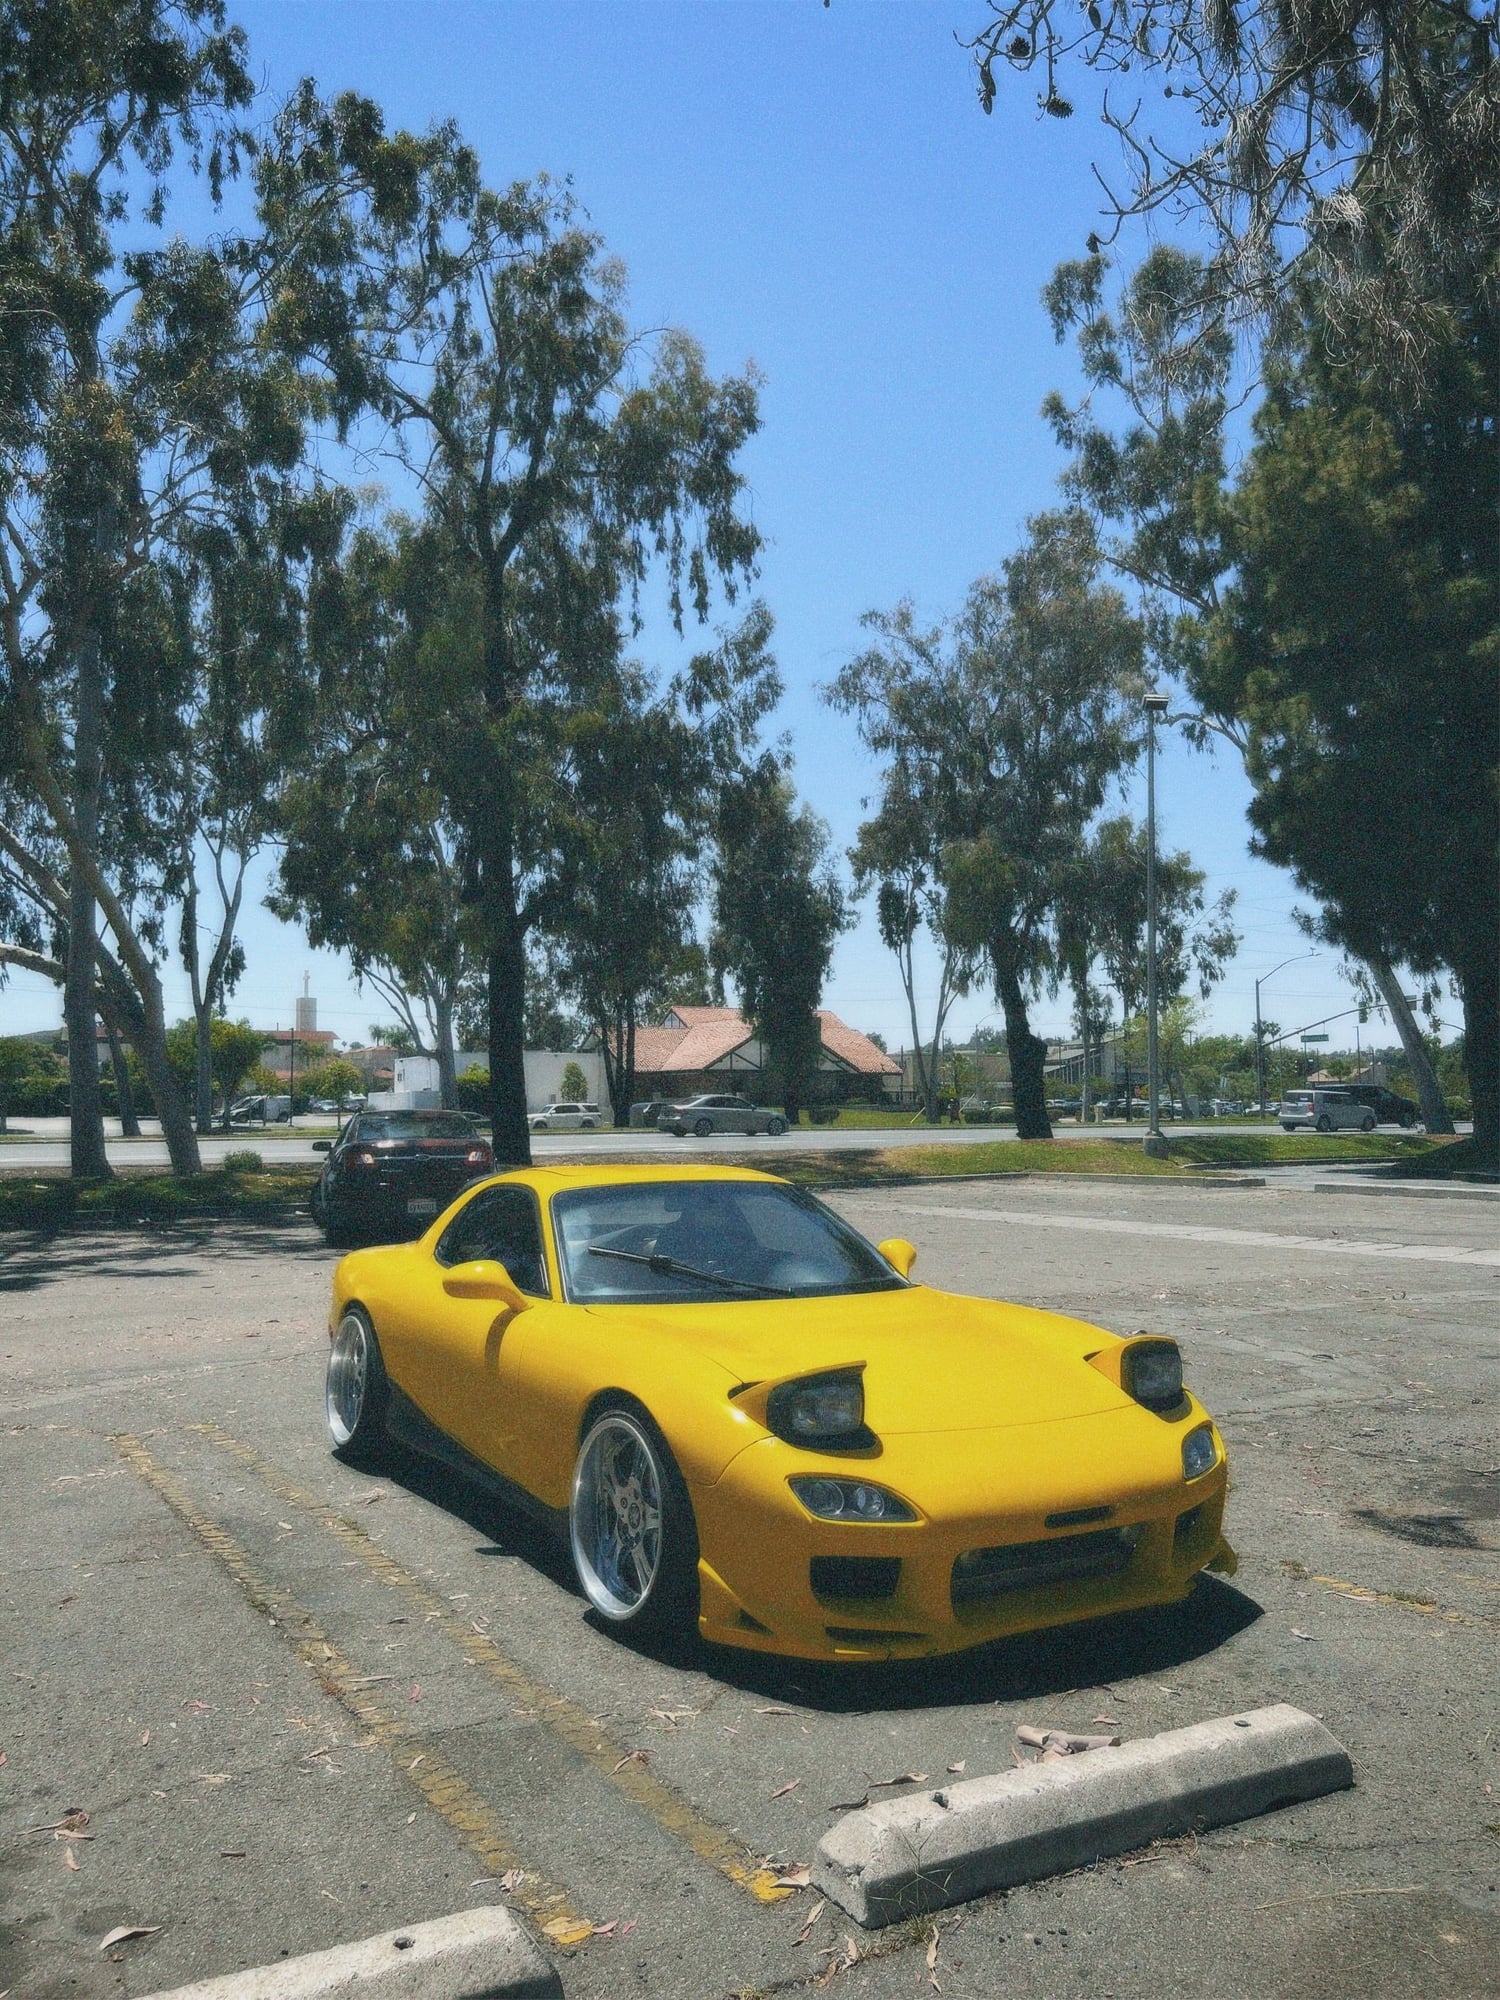 1993 Mazda RX-7 - SELLING 1993 Mazda RX-7 - Used - VIN JM1FD3317P0205751 - 125,000 Miles - Other - 2WD - Manual - Yellow - Escondido, CA 92025, United States